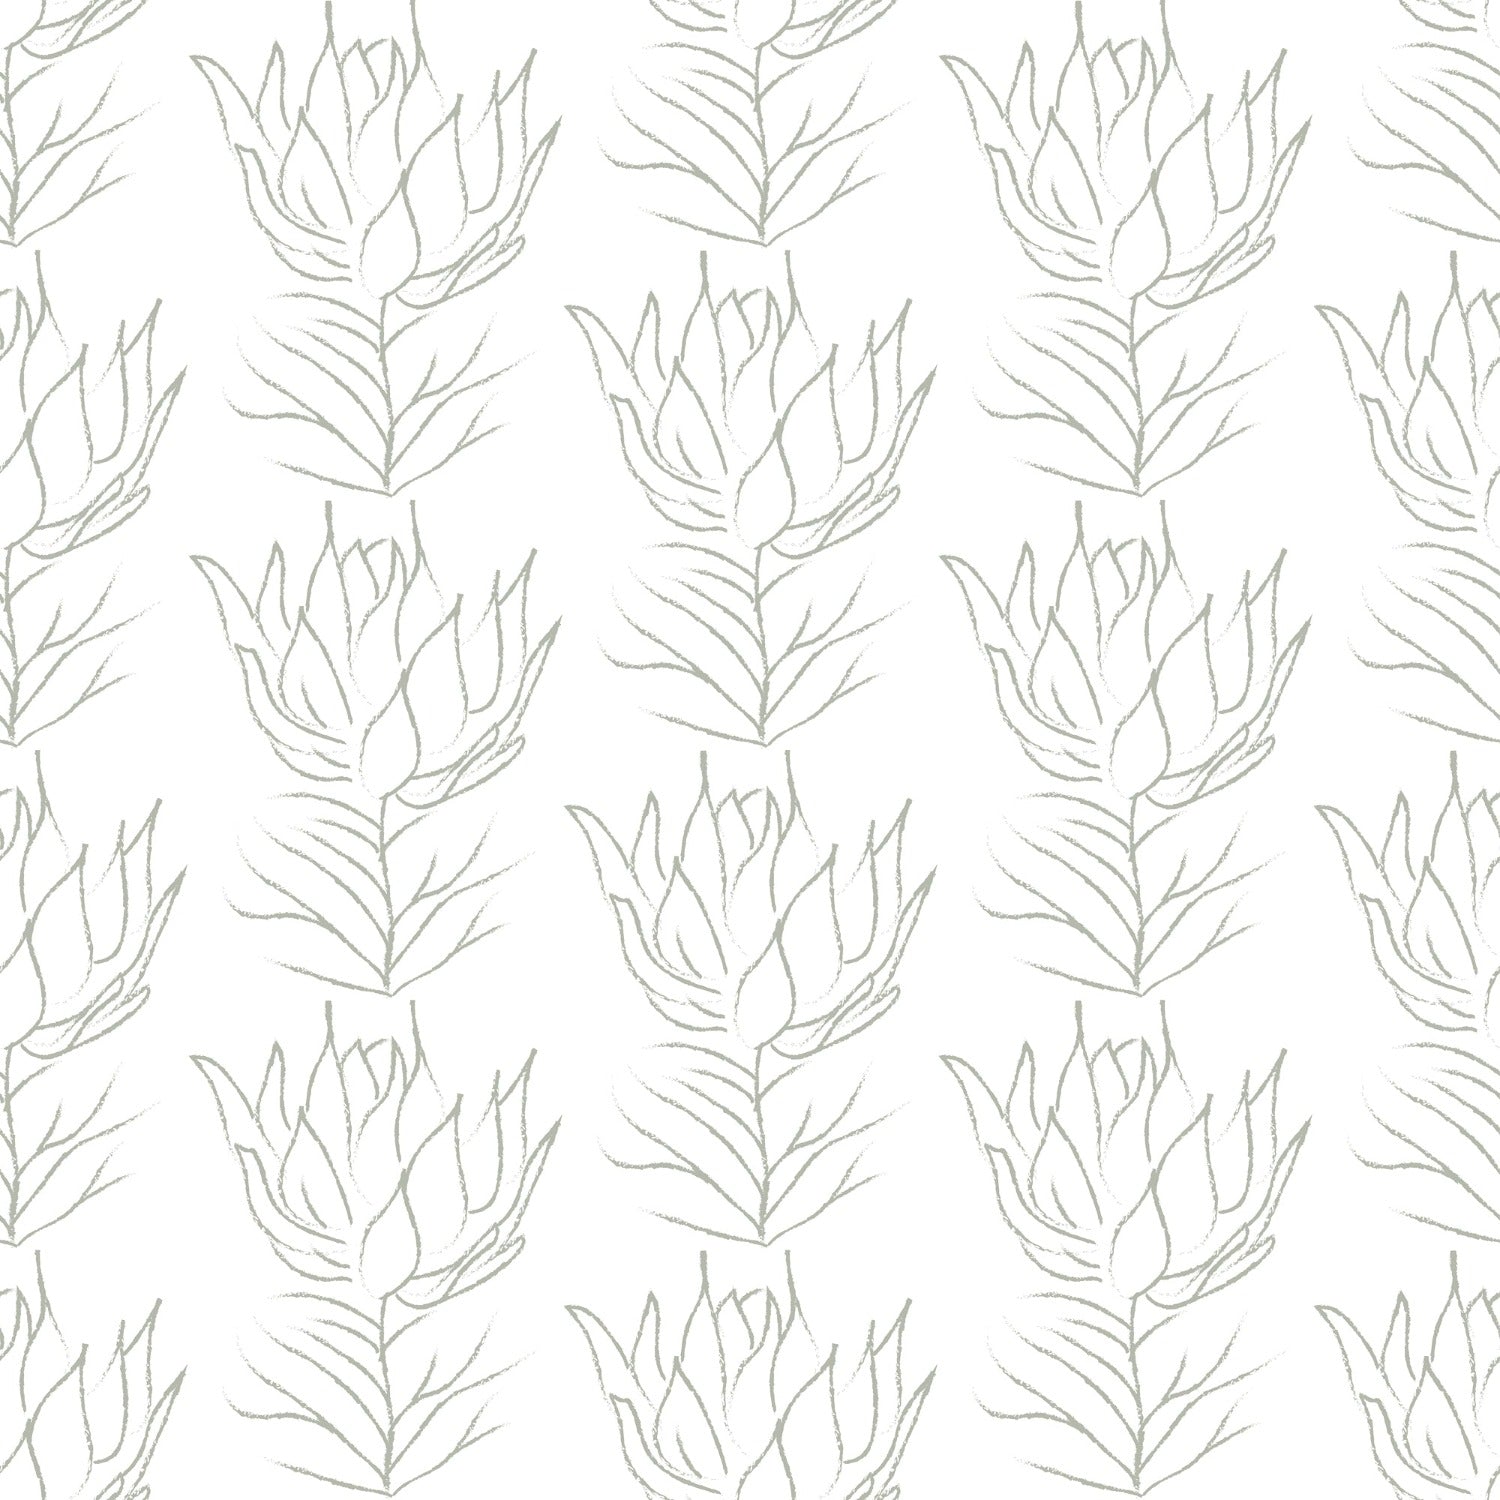 A close-up view of the Line Art Bouquet Wallpaper displaying the intricate details of the hand-drawn floral design, where the line art technique brings each bouquet to life against a muted background, perfect for a sophisticated and modern aesthetic.